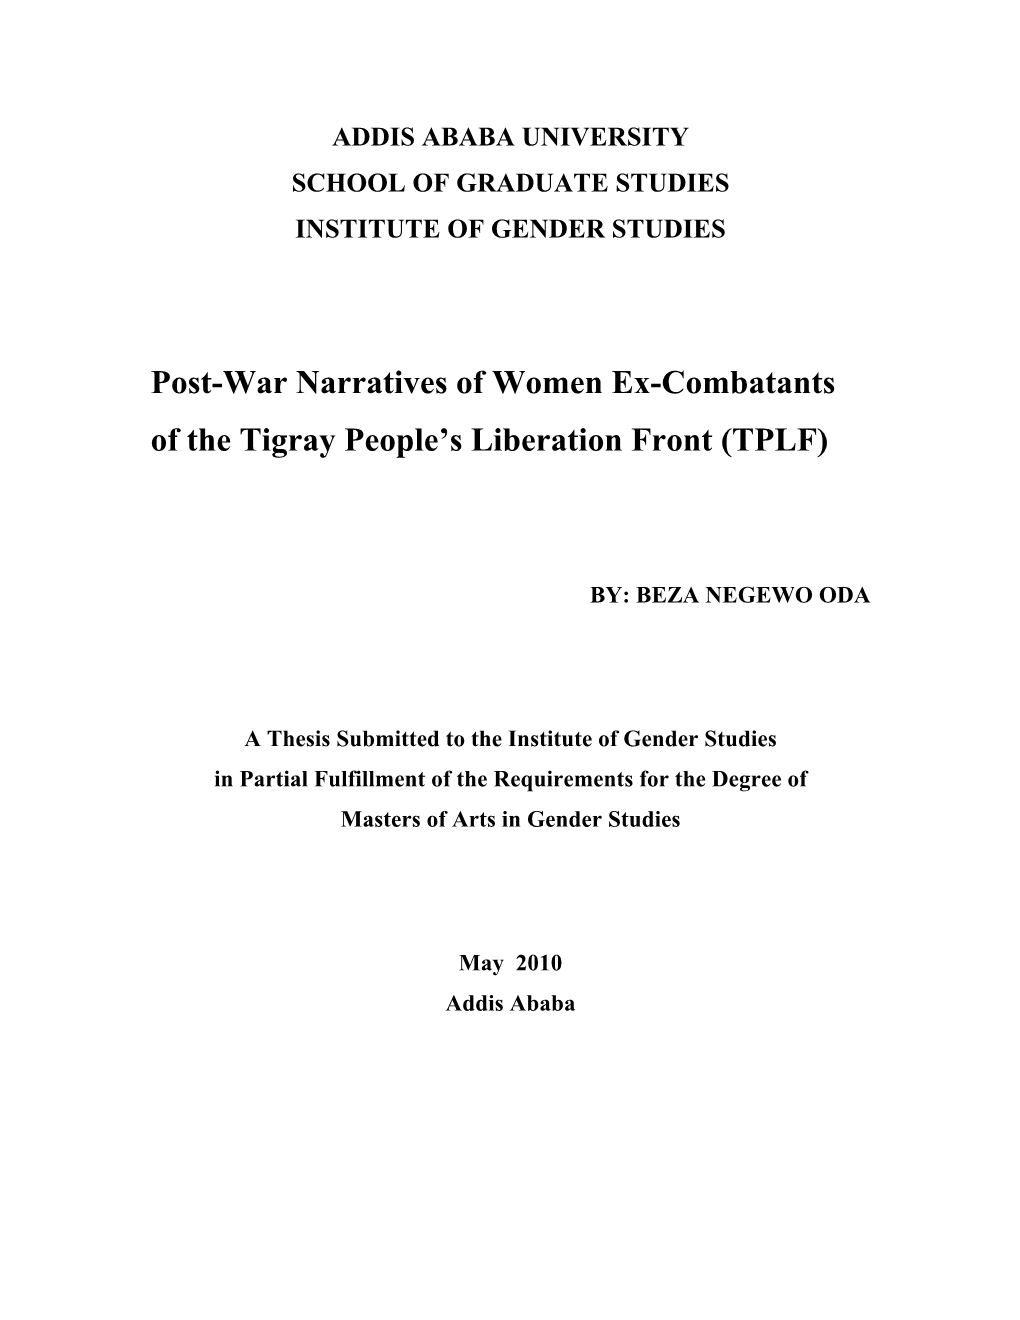 Post-War Narratives of Women Ex-Combatants of the Tigray People’S Liberation Front (TPLF)